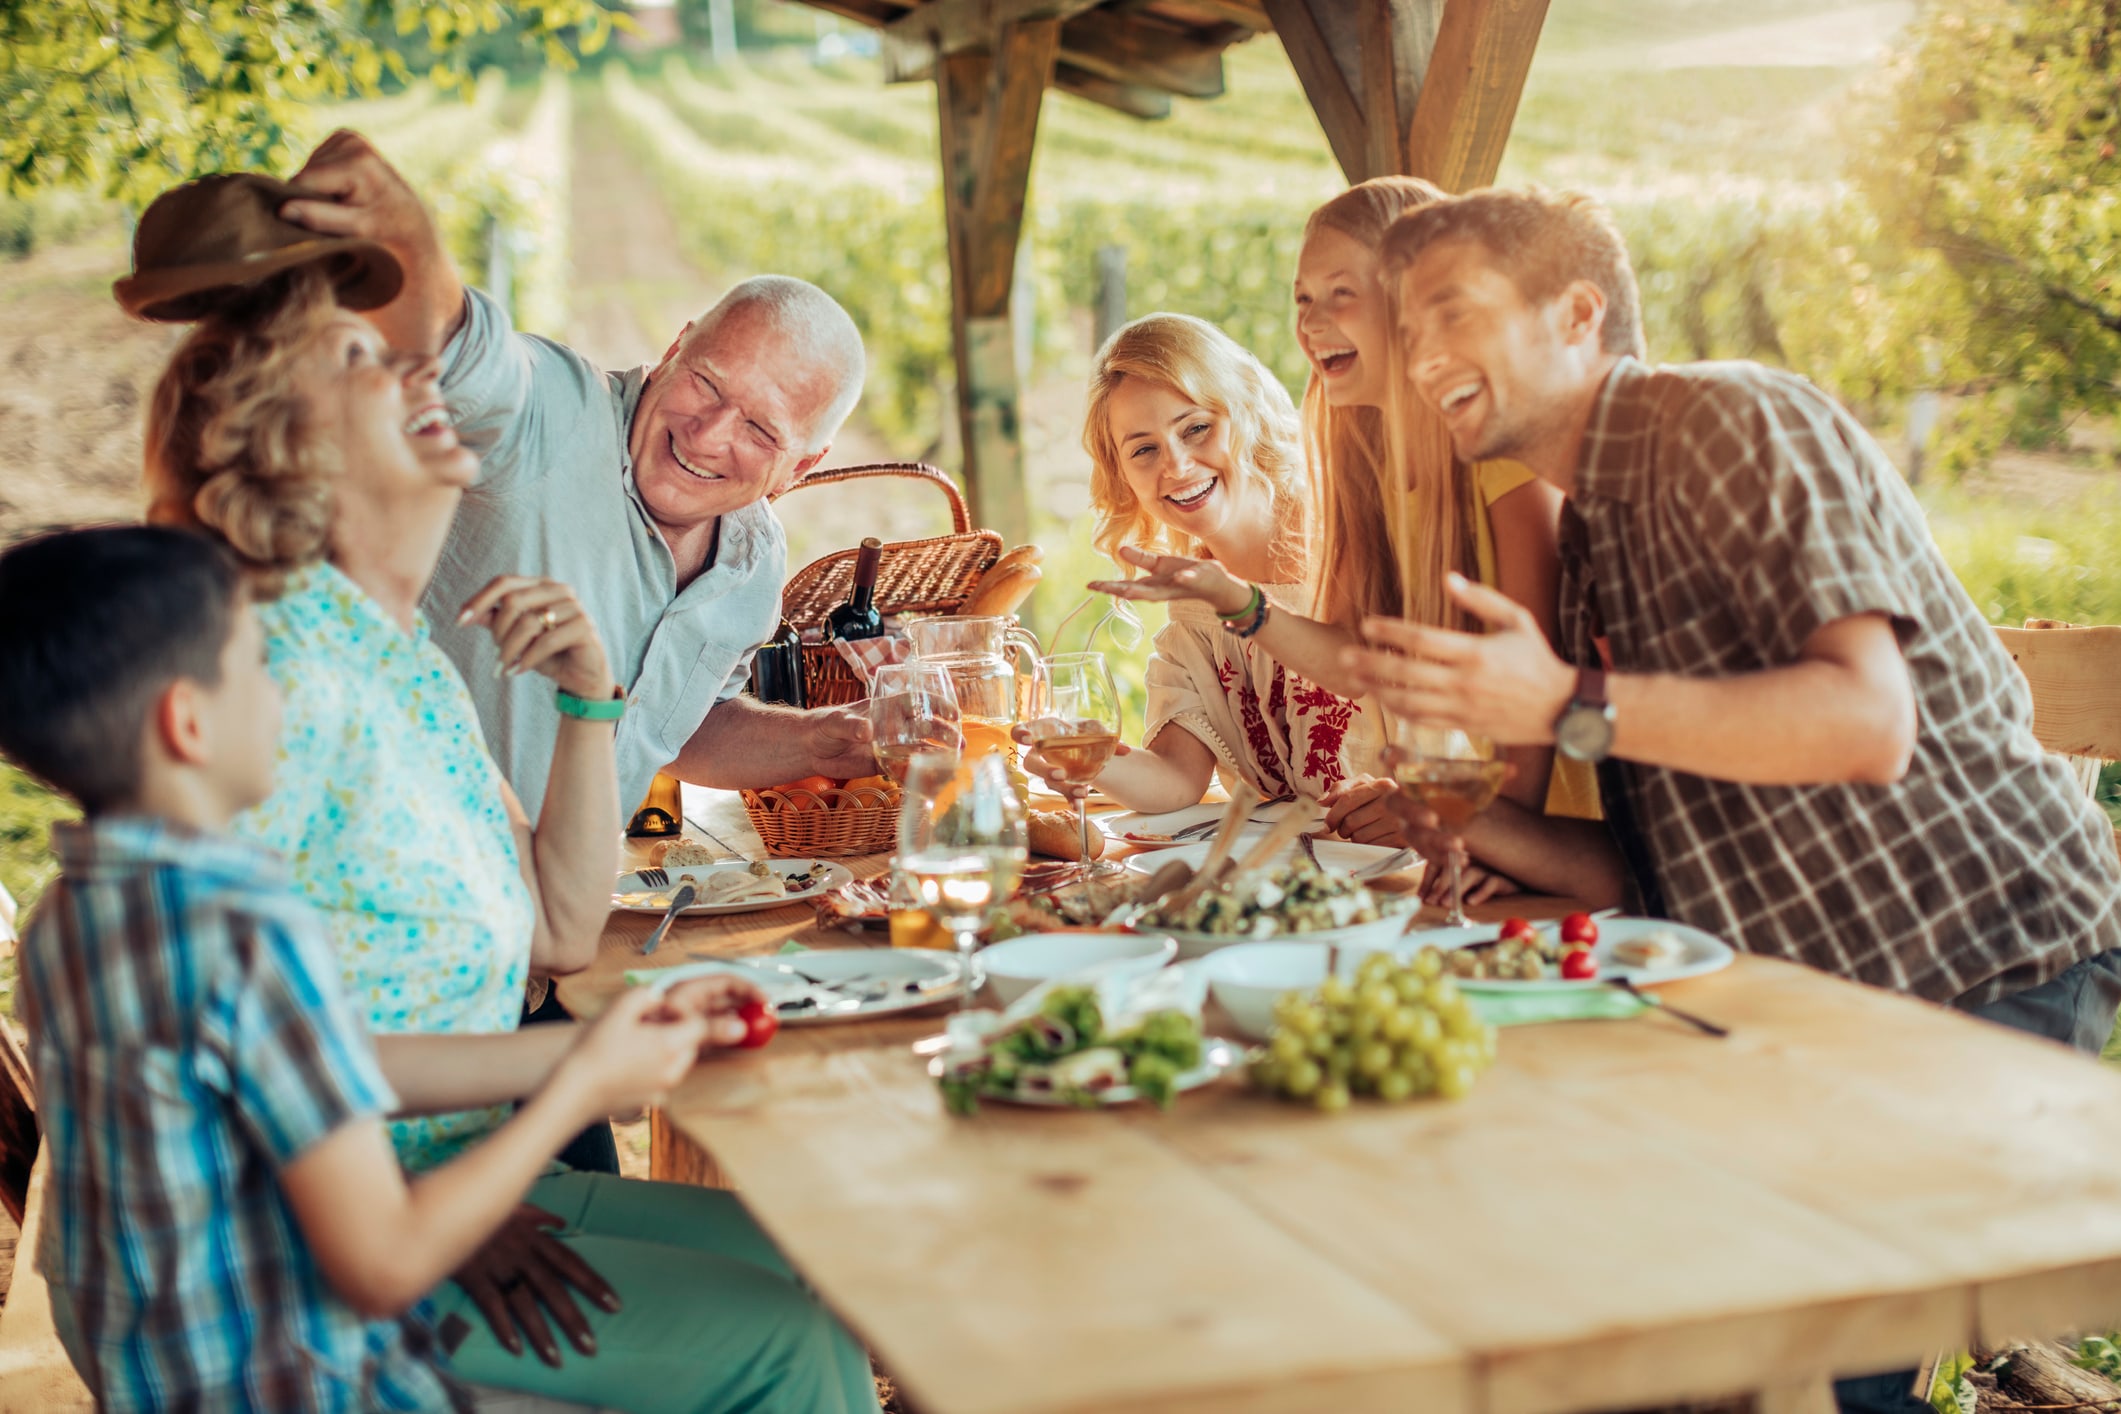 It's the perfect time of year to enjoy a meal with your older friends and family.